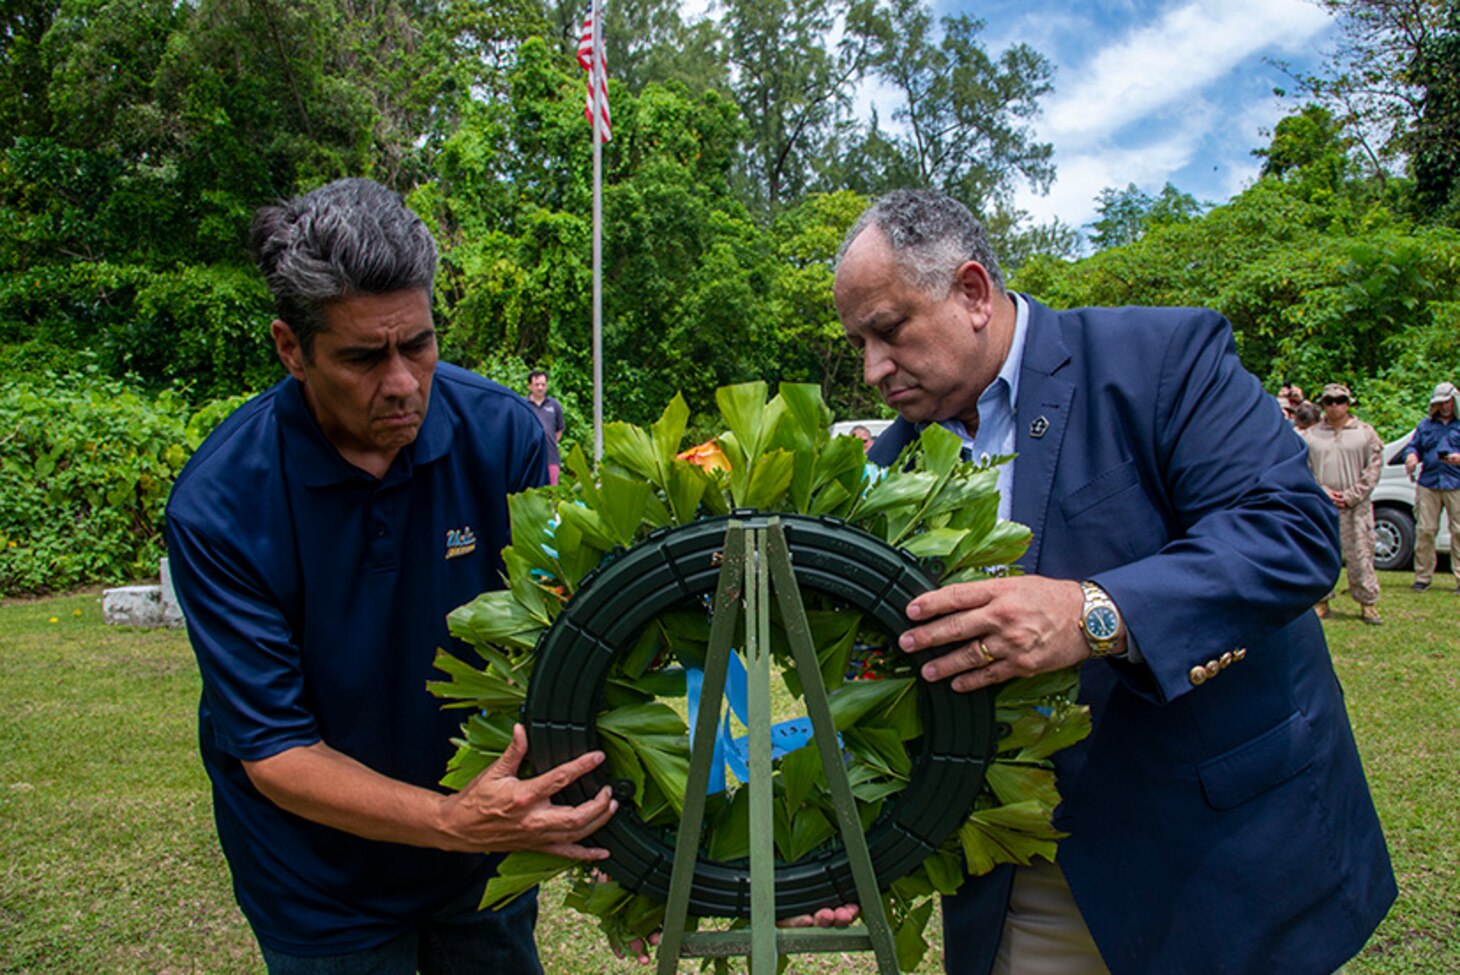 PELELIU, Republic of Palau (March 1, 2024) – Republic of Palau President Surangel Whipps, Jr. and Secretary of the Navy Carlos Del Toro lay a wreath at the 81st Infantry Division Memorial in Peleliu, in the Republic of Palau, March 1. The memorial honors members of the 81st Infantry Division who assisted the 1st Marine Division during the Battle of Peleliu in World War II. Secretary Del Toro’s visit to Palau is part of a
series of strategic engagements in the Indo-Pacific to promote the protection of the maritime commons in line with his Maritime Statecraft efforts. (U.S. Navy photo by Shaina O’Neal/Released)